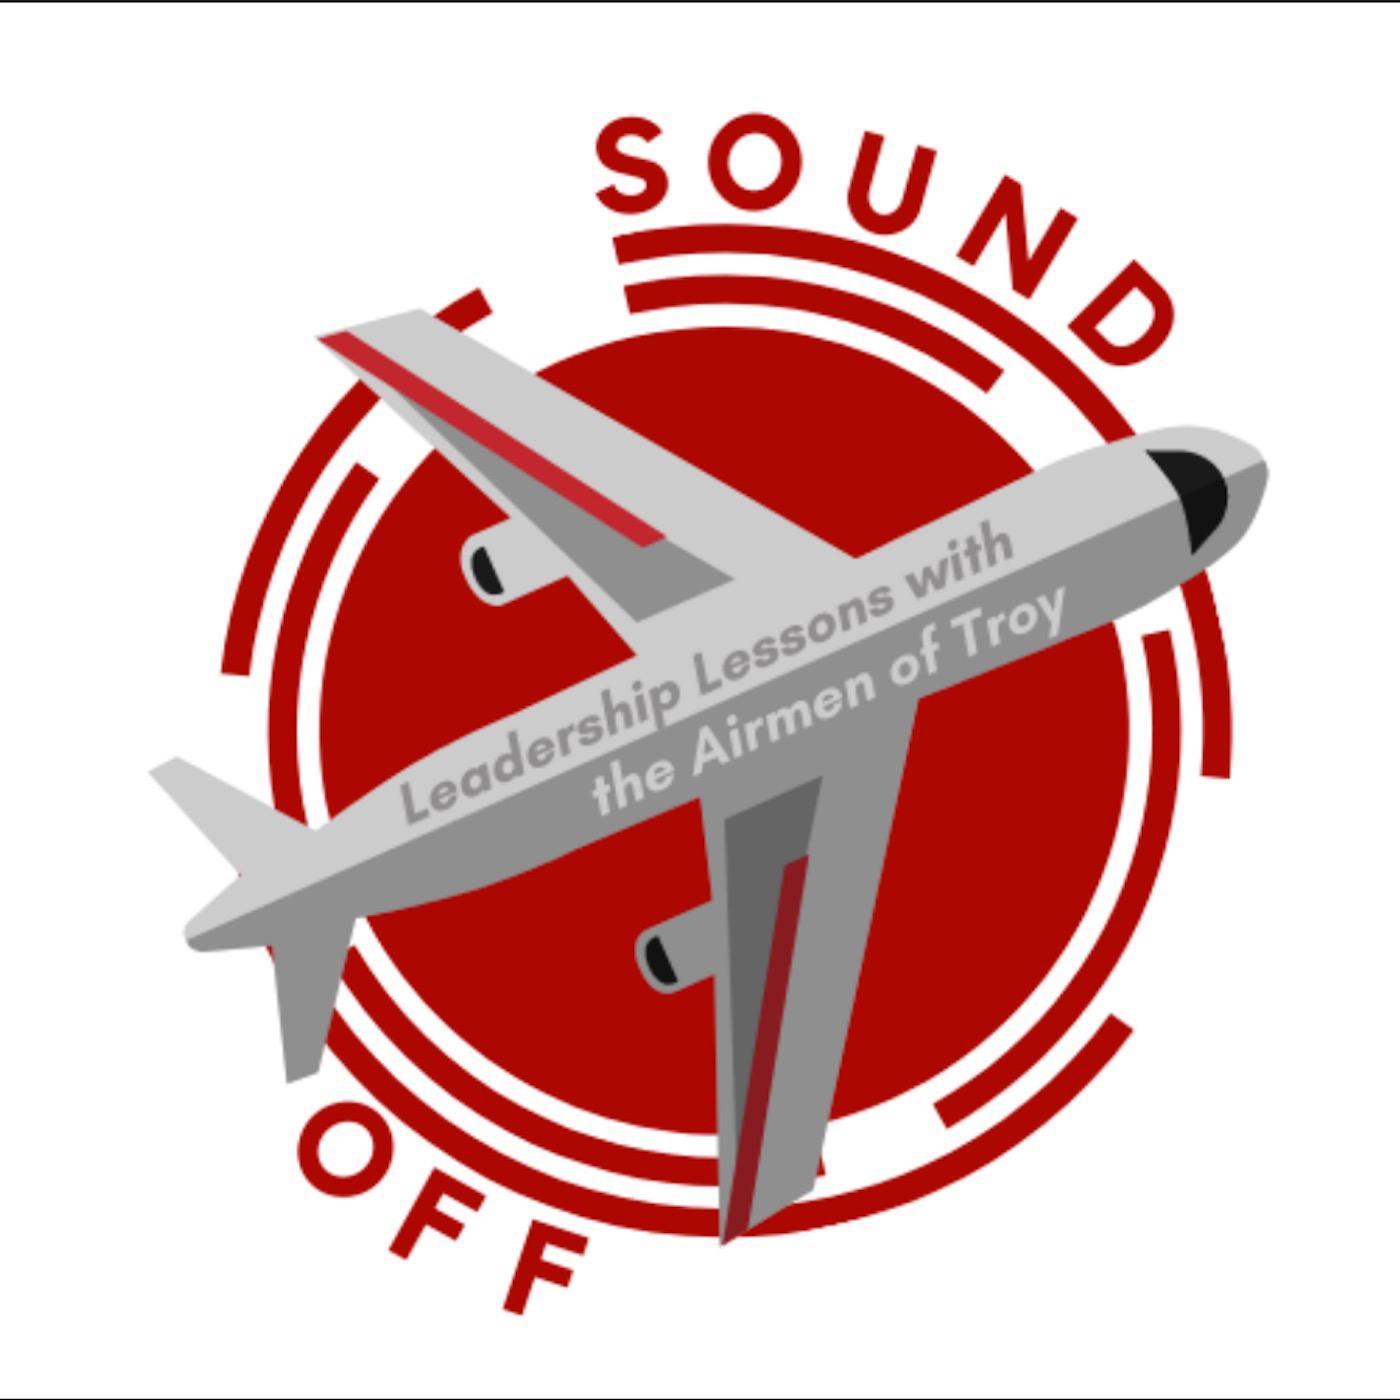 Sound Off: Leadership Lessons with the Airmen of Troy